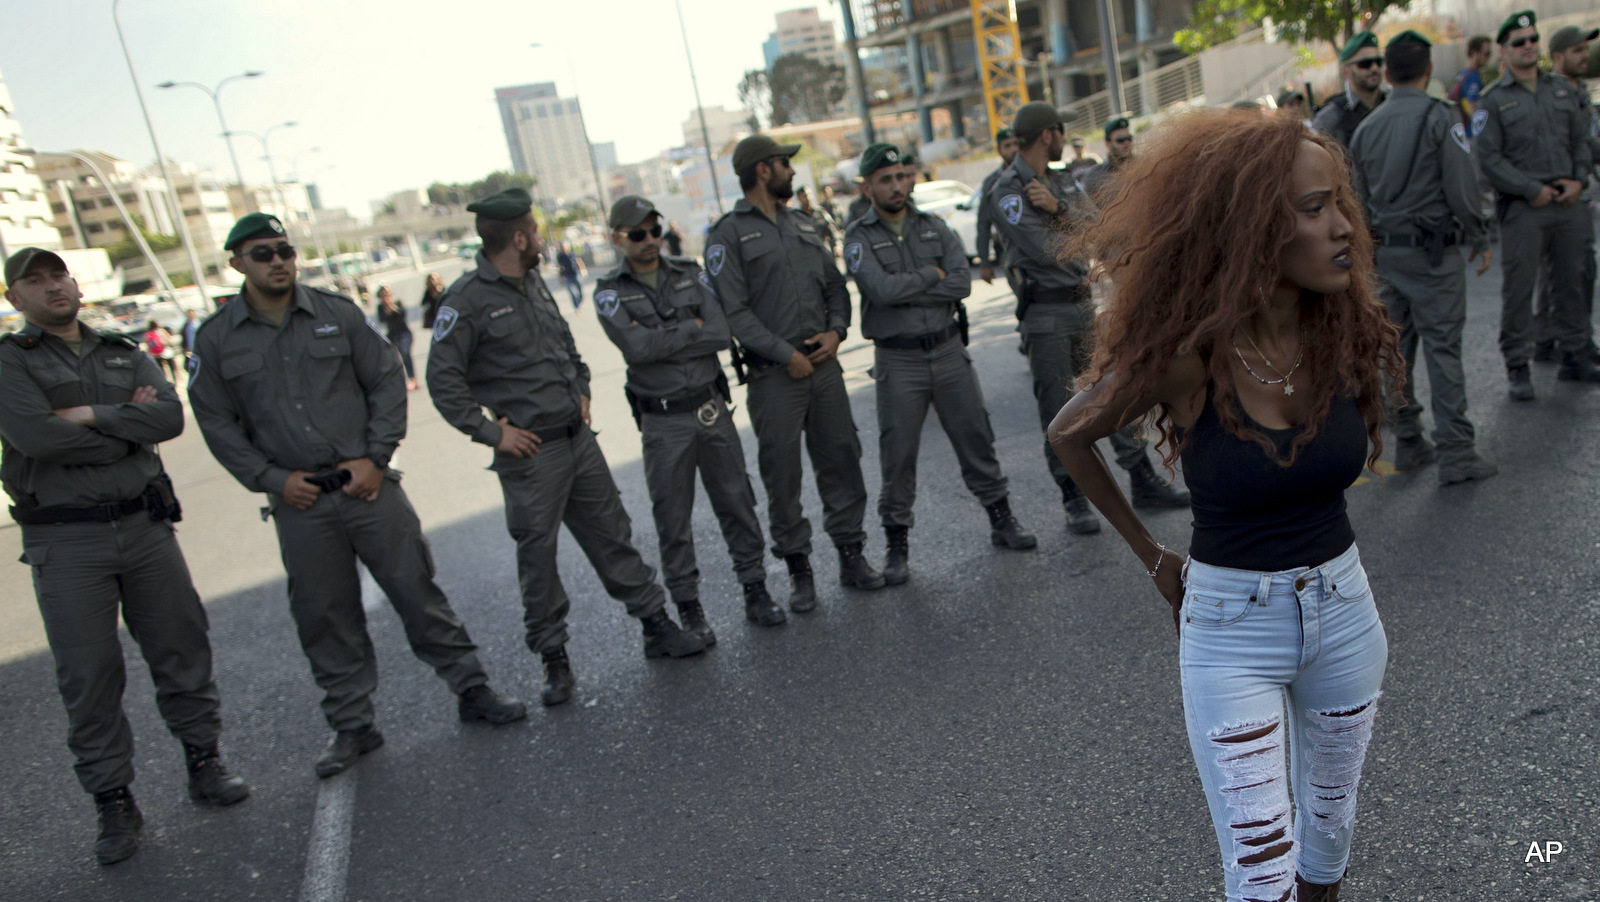 Israel's Jewish Ethiopians block highway during a protest against racism and police brutality in Tel Aviv, Israel, Sunday, May 3, 2015. Several thousand people, mostly from Israel's Jewish Ethiopian minority, protested in Tel Aviv against racism and police brutality on Sunday shutting down a major highway and scuffling with police.